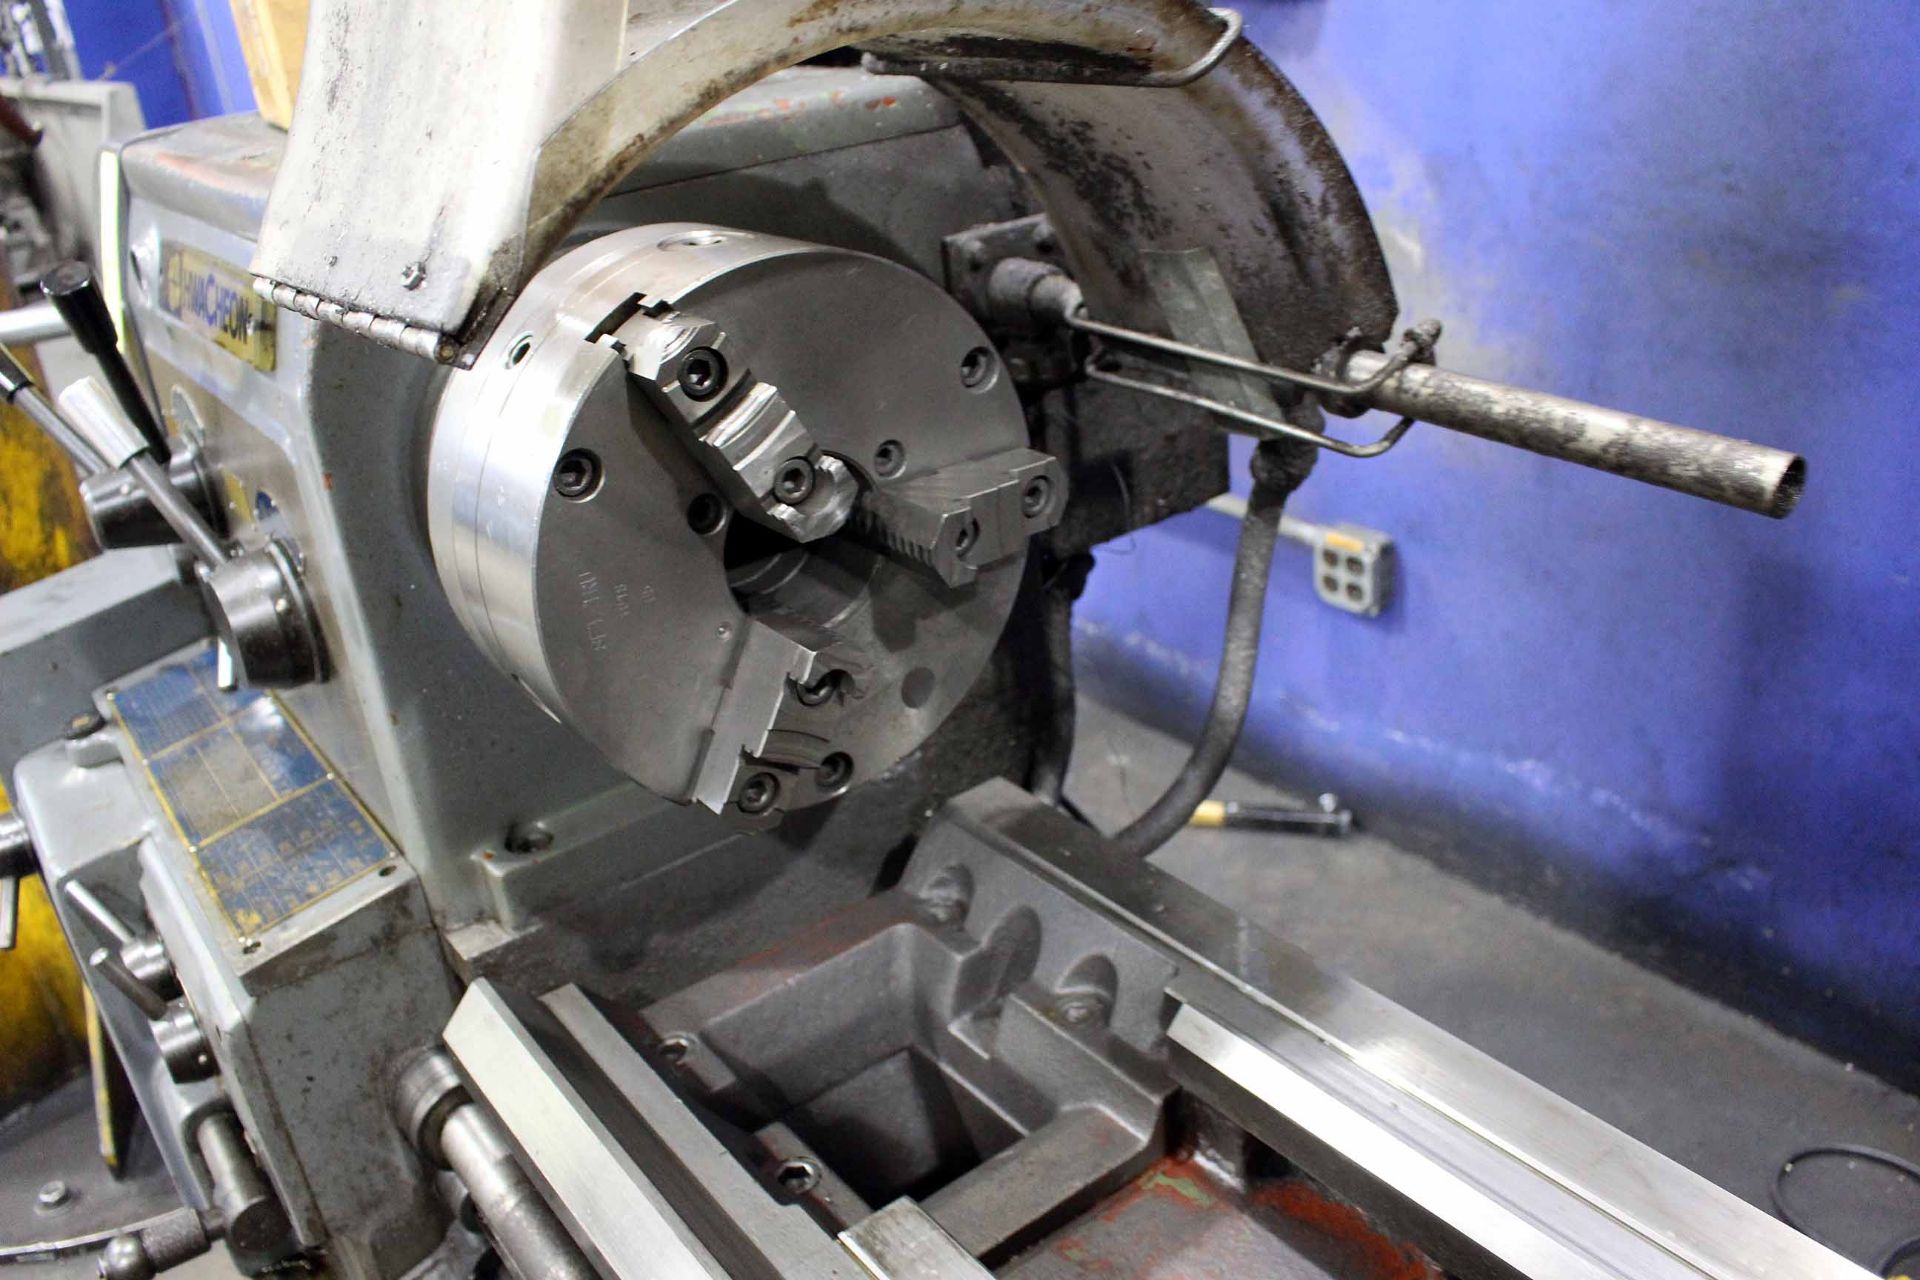 GAP BED ENGINE LATHE, HWACHEON 17" X 60" MDL. HL460, 7-1/2 HP motor, 2-axis D.R.O., steadyrest, - Image 3 of 3